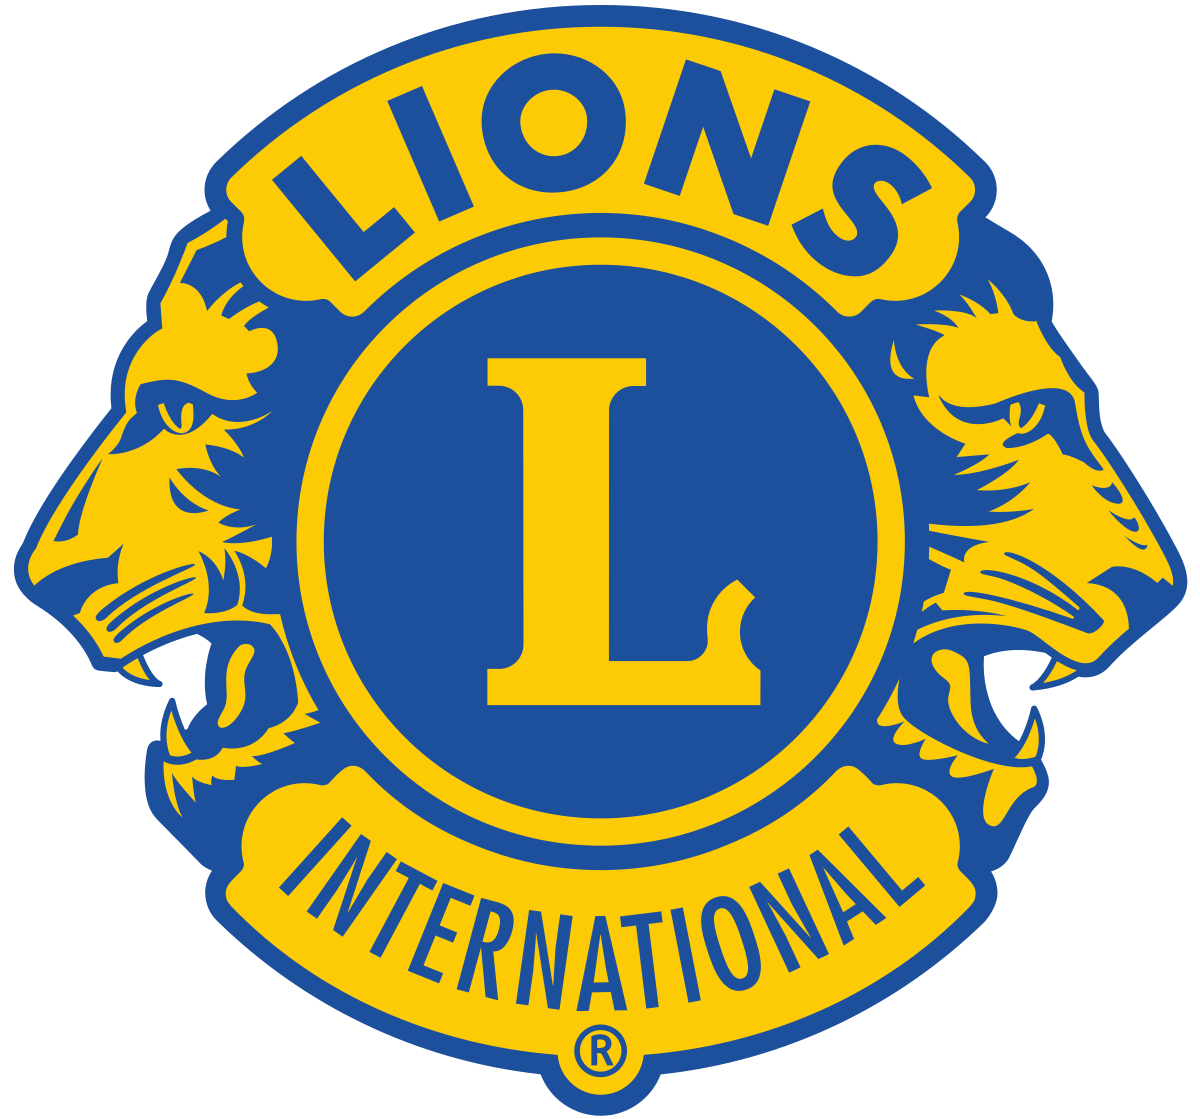 Lions Club conducts vision screenings for hundreds of Tomahawk students